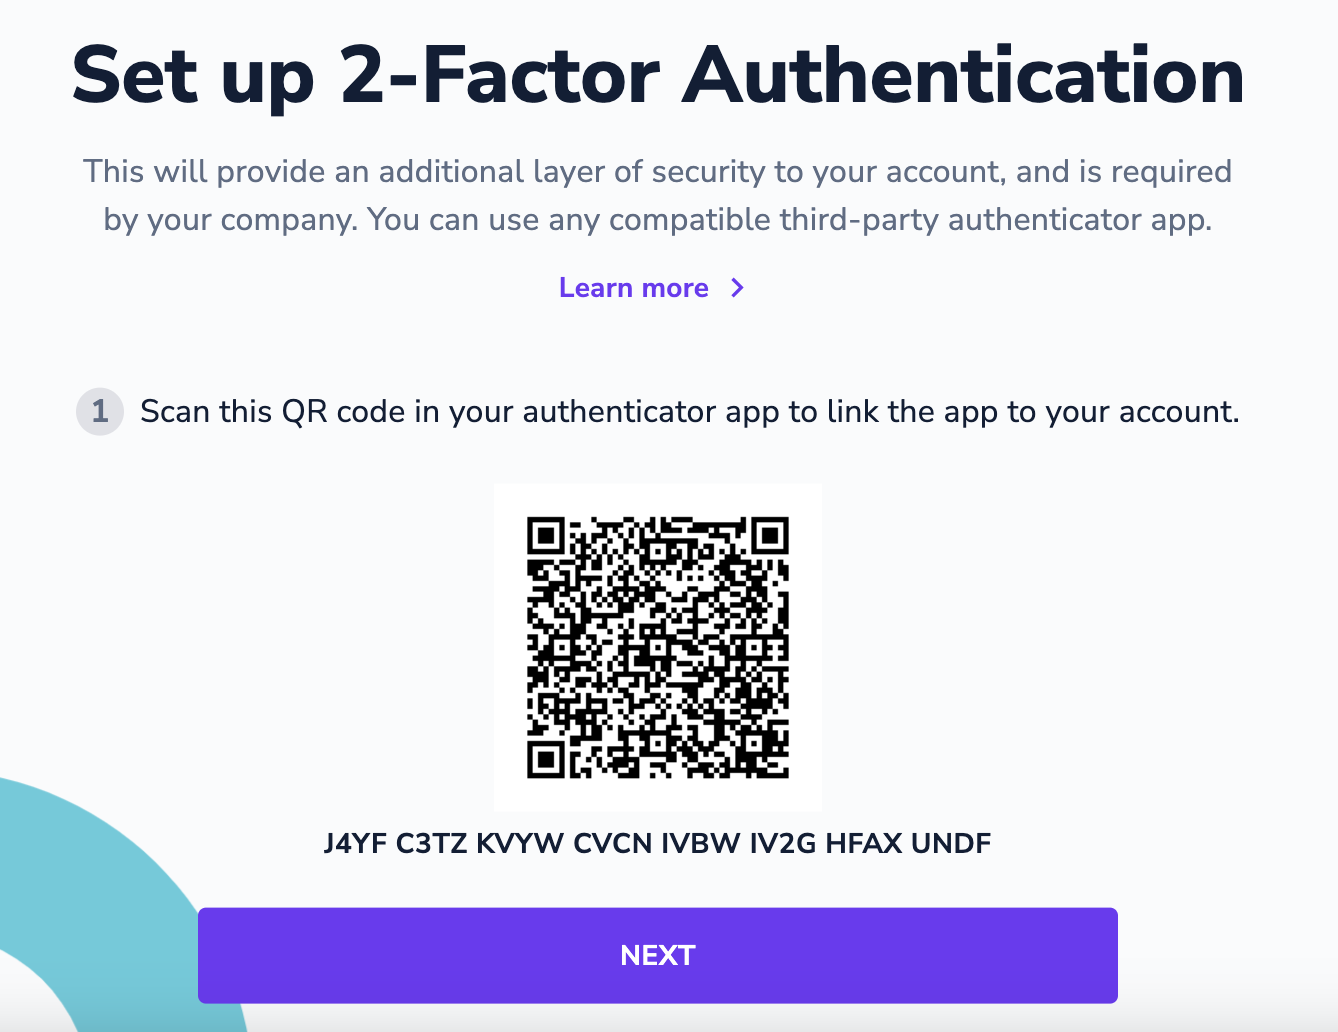 Settting up 2fa by scanning a QR conde to activate it in your third party authenticator app